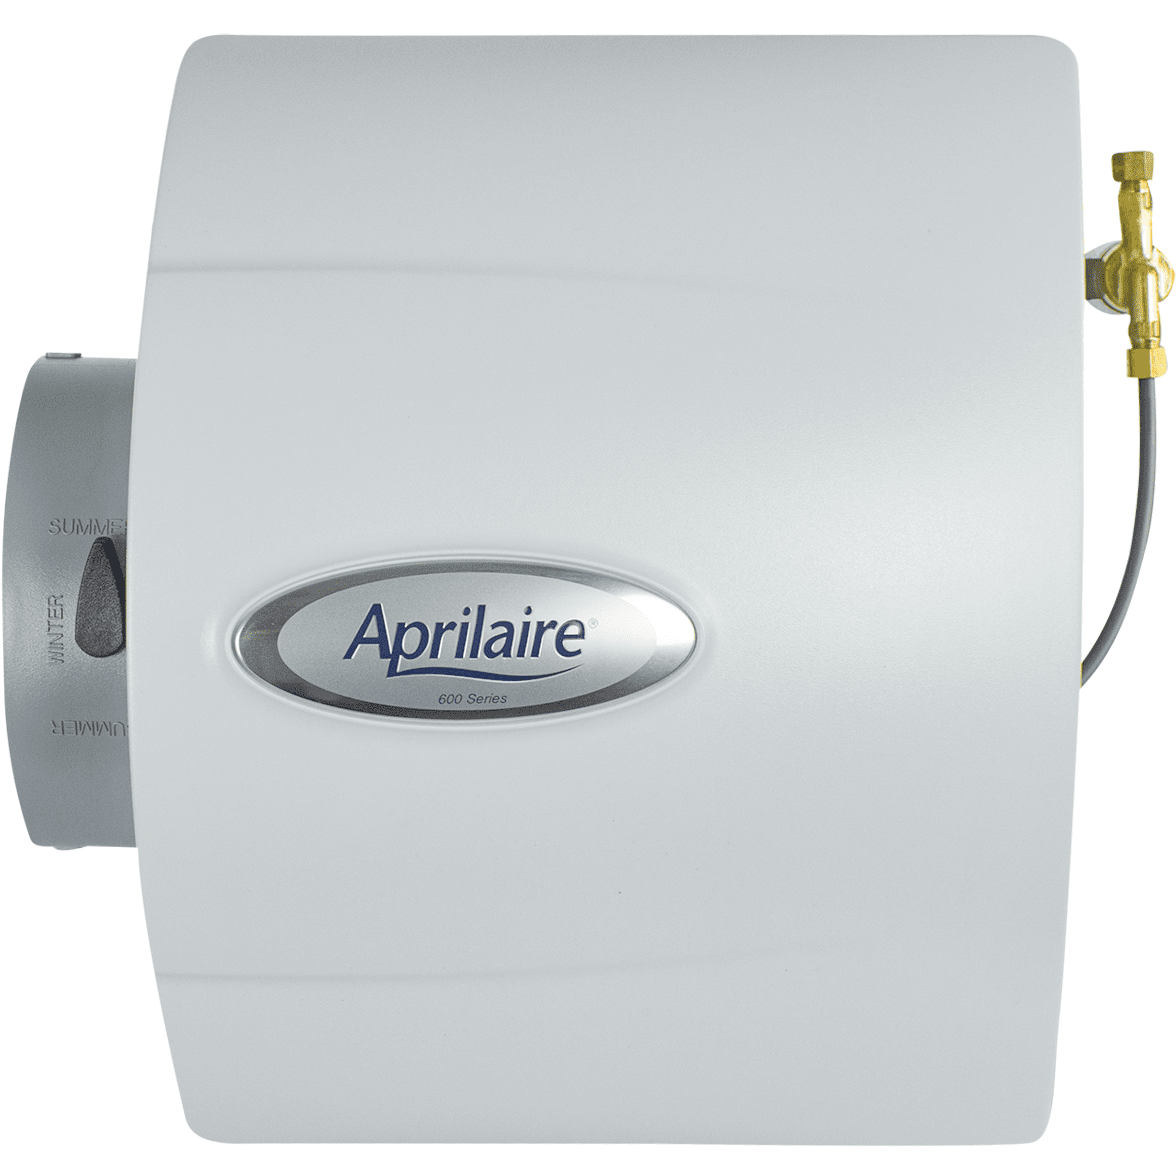 Aprilaire Model 600 Large Whole House Humidifiers